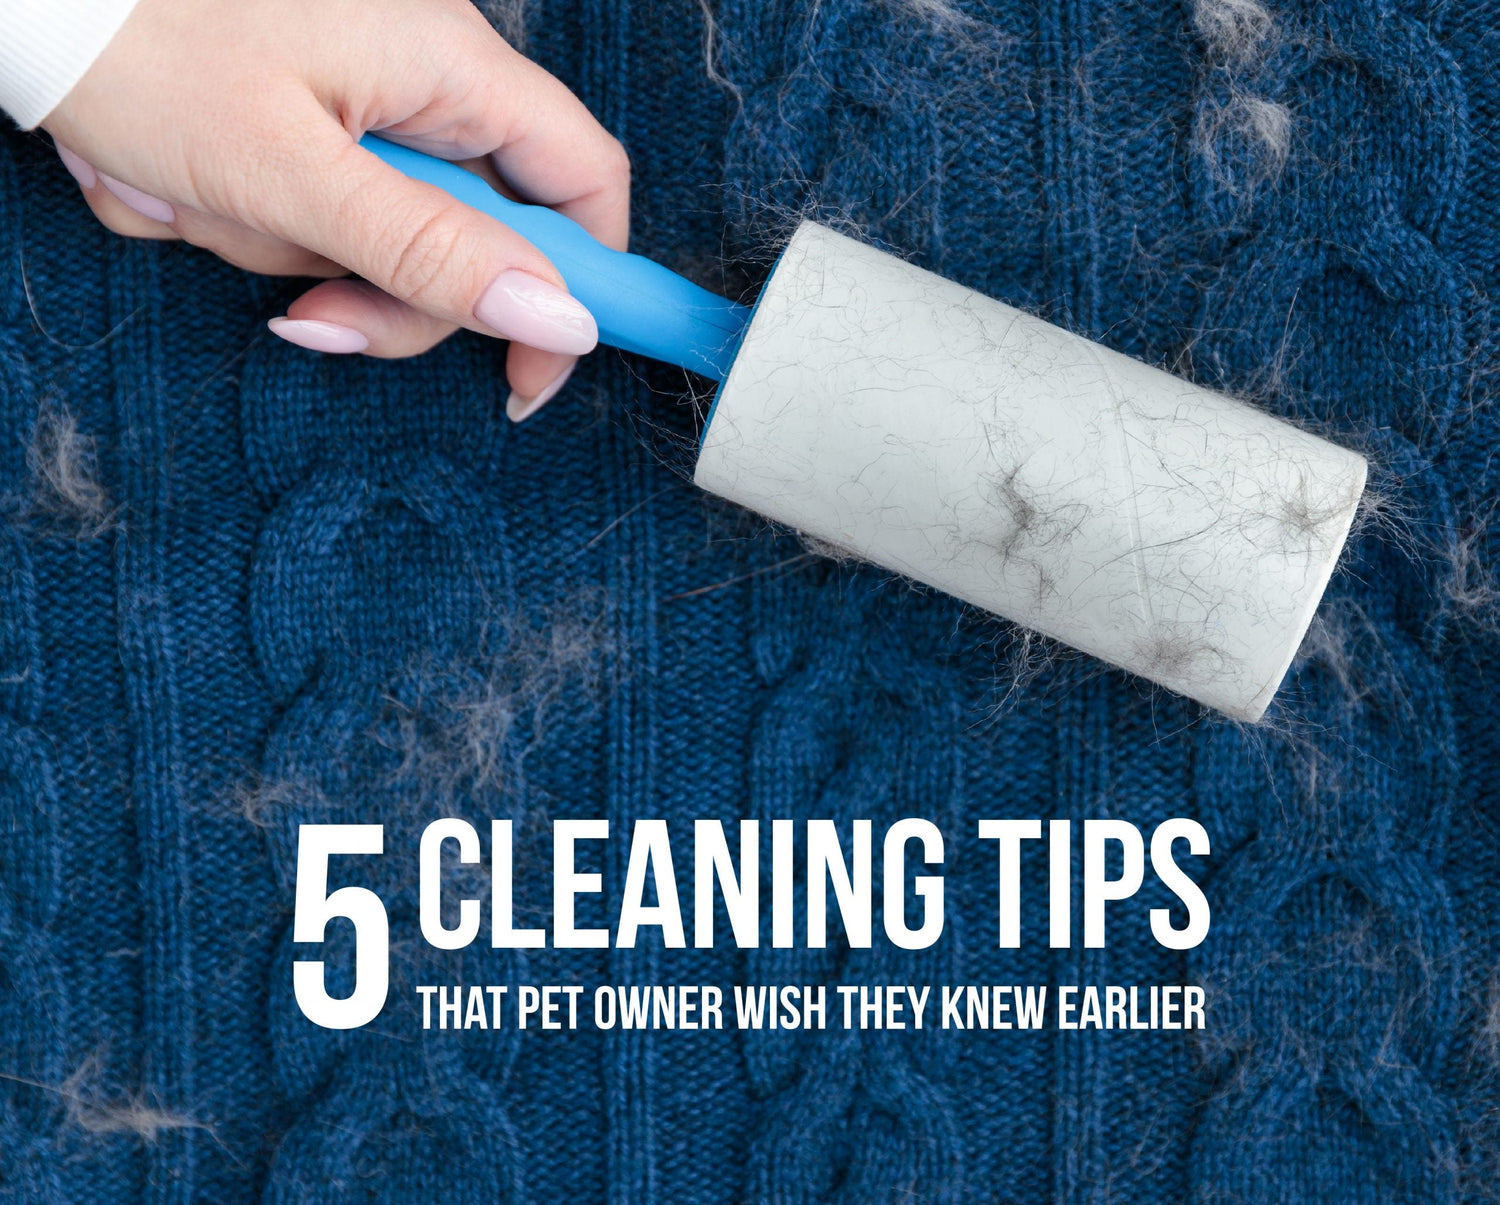 5 Cleaning Tips that Pet Owner Wish They Knew Earlier